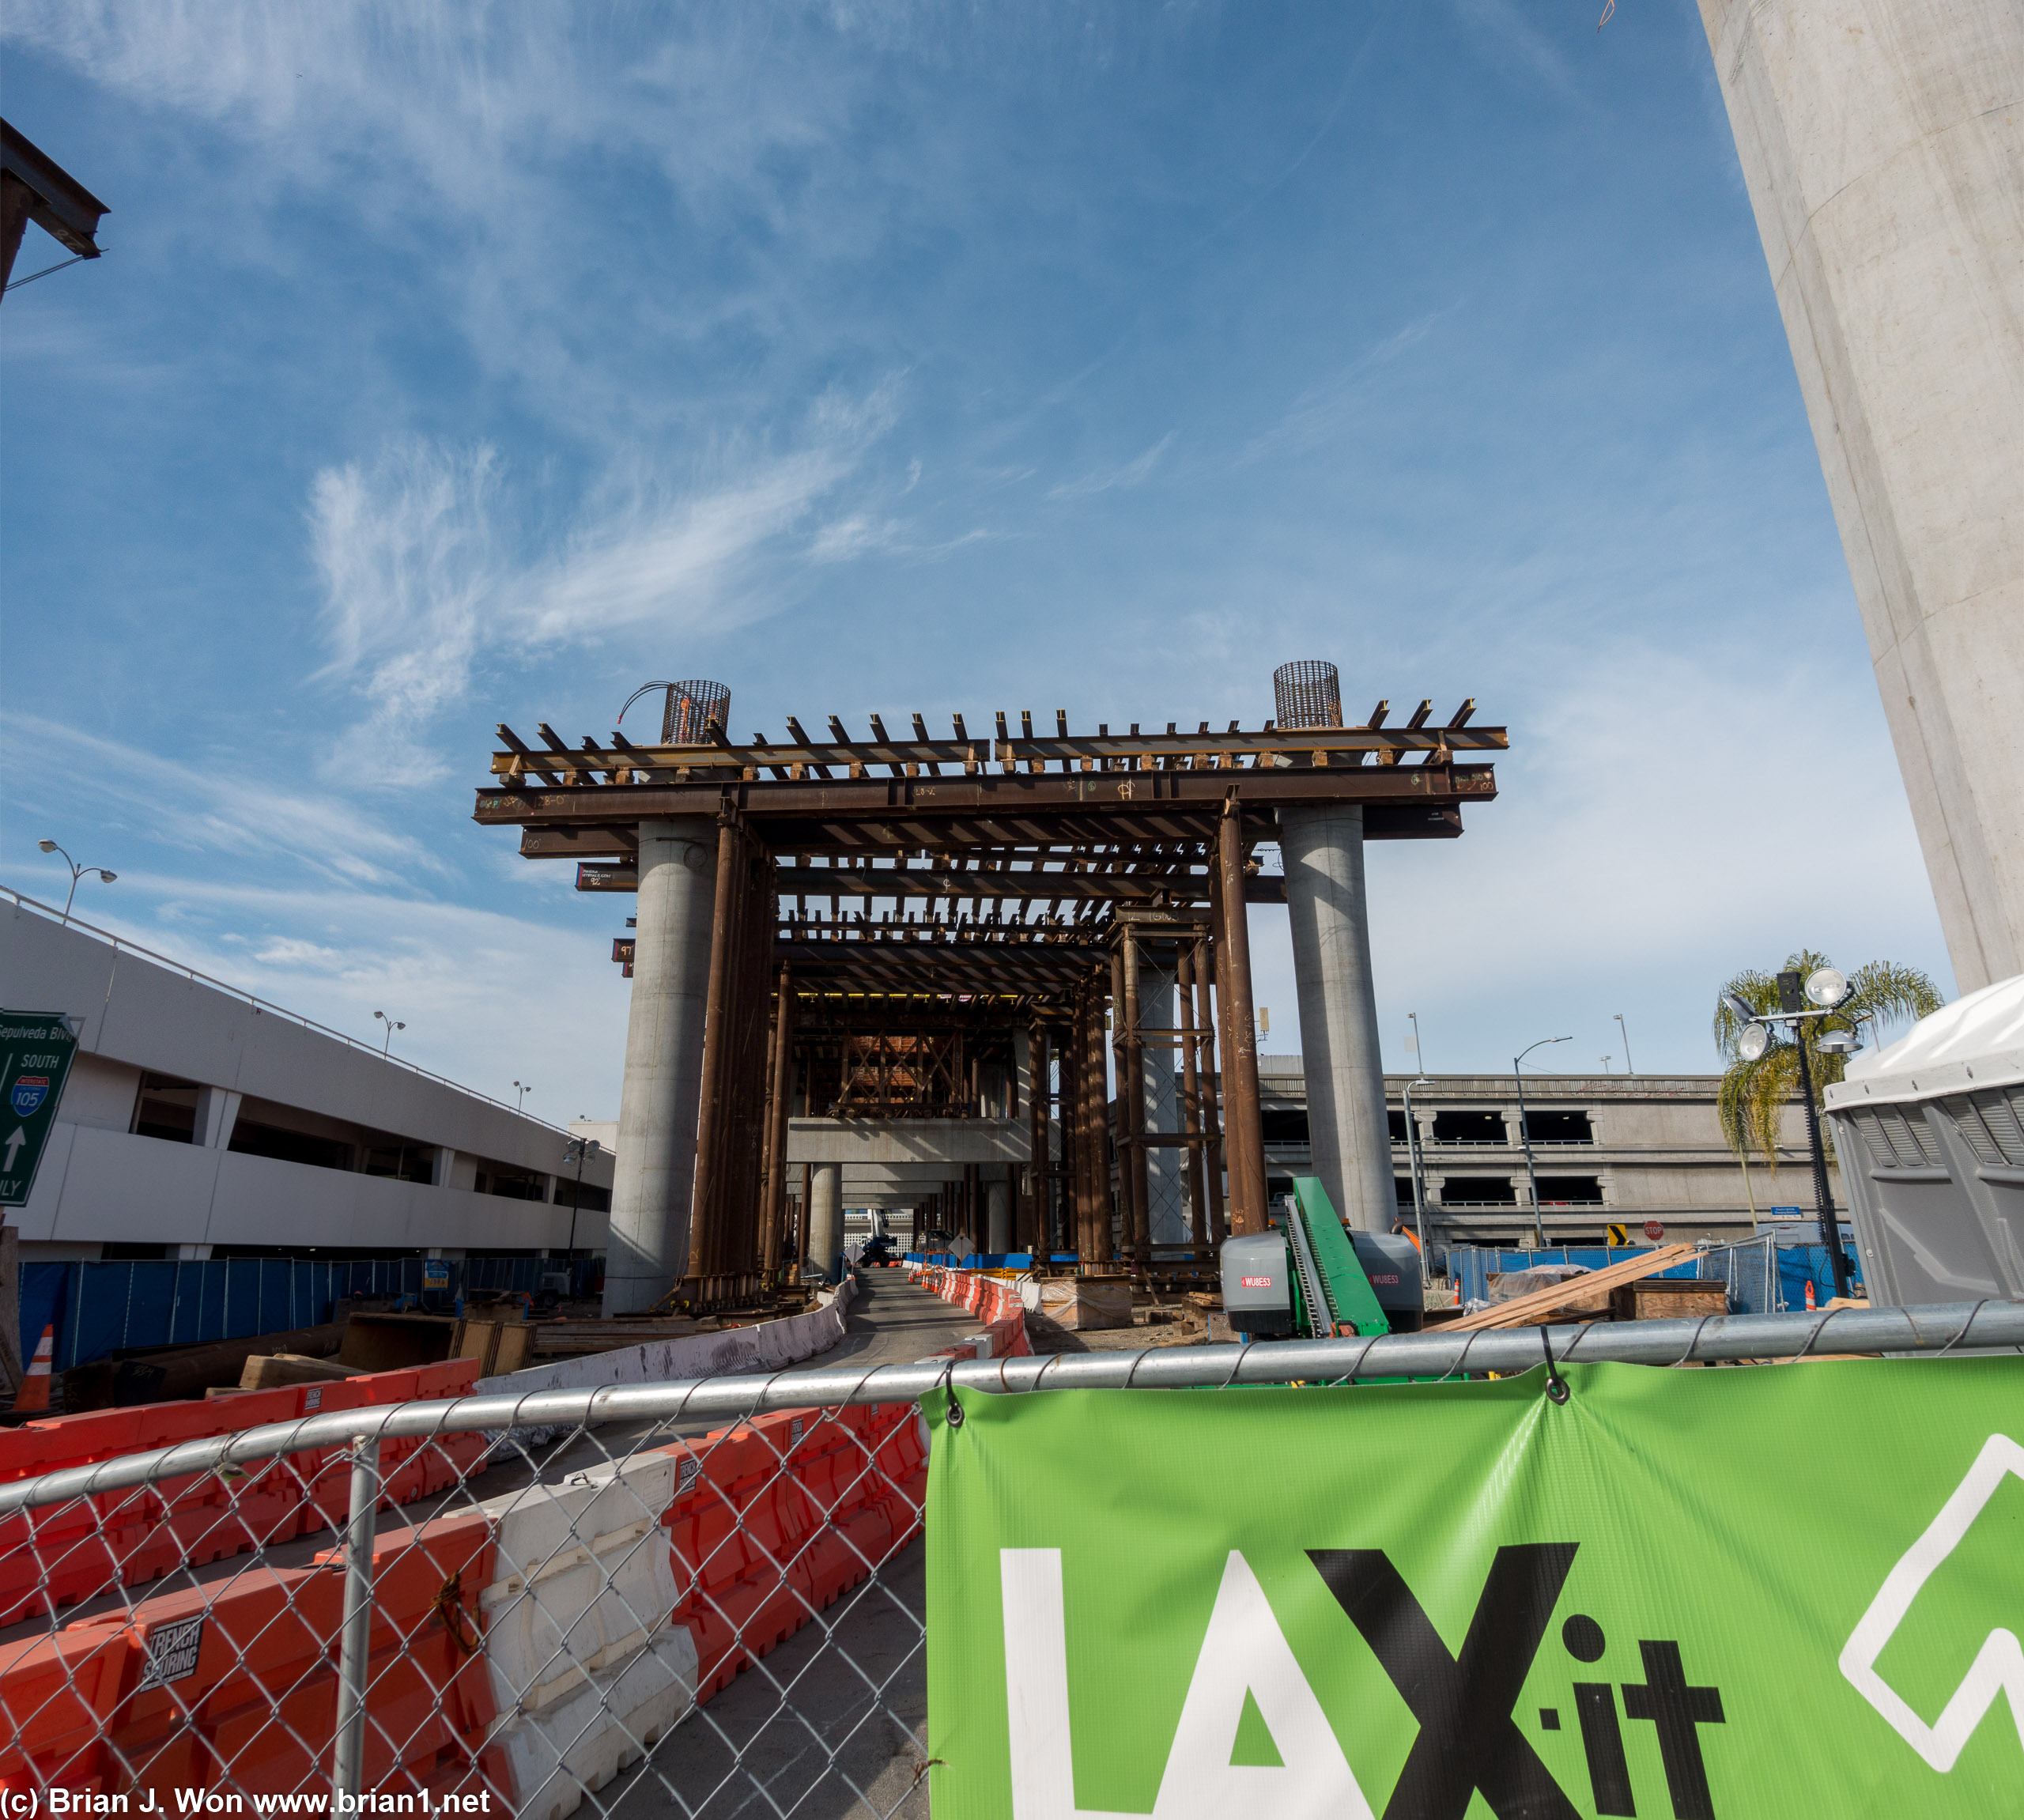 LAX peoplemover, under construction.